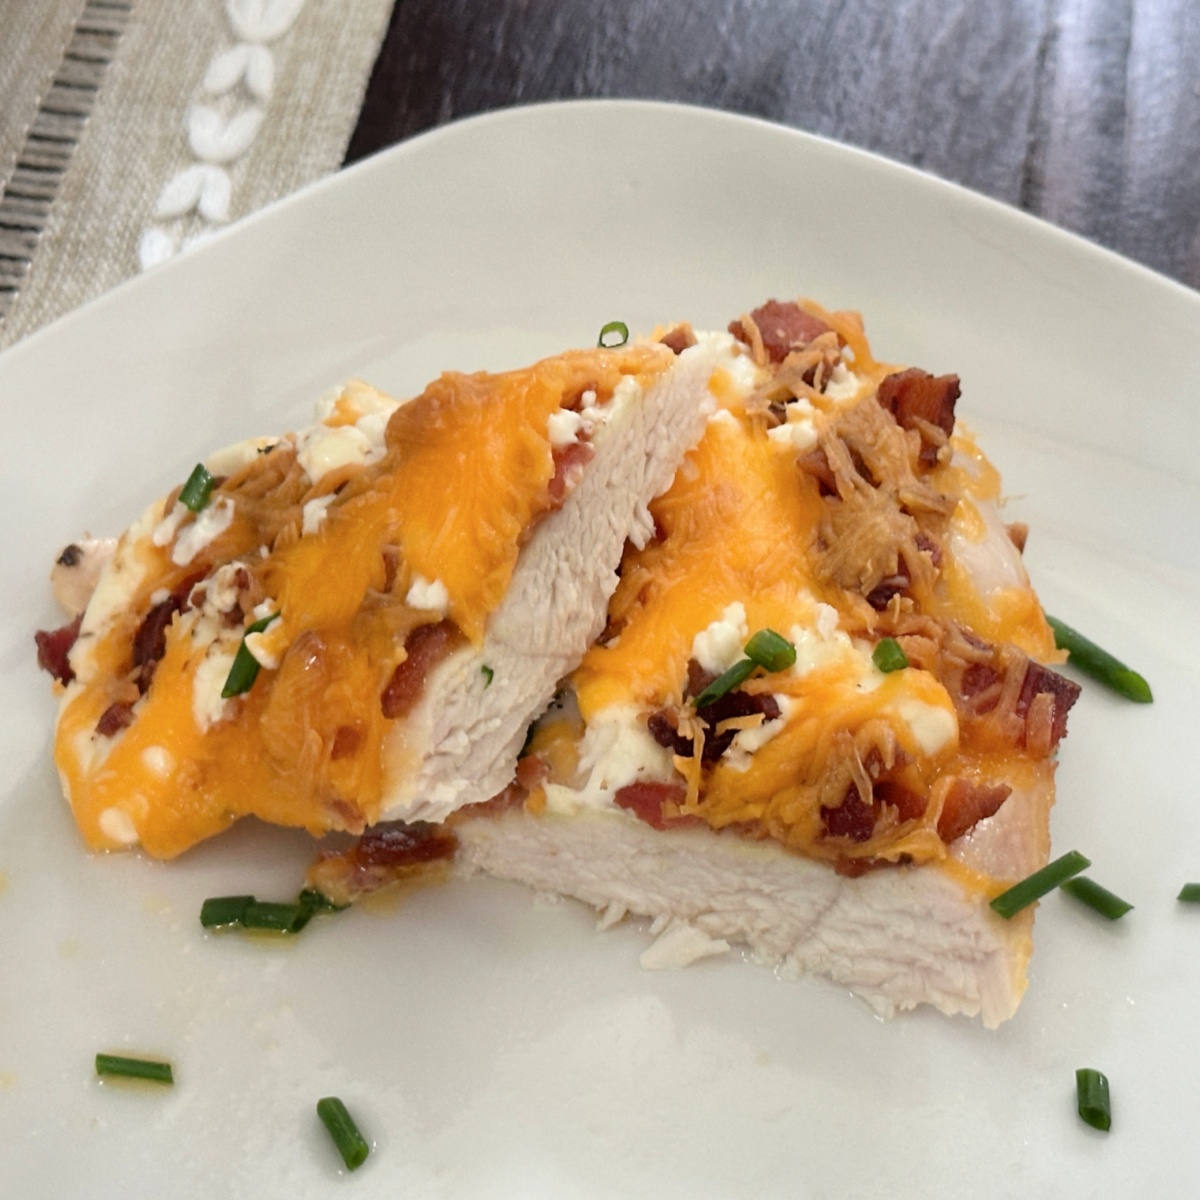 Loaded Baked Chicken - Easy 4 Ingredient Low-Carb Recipe